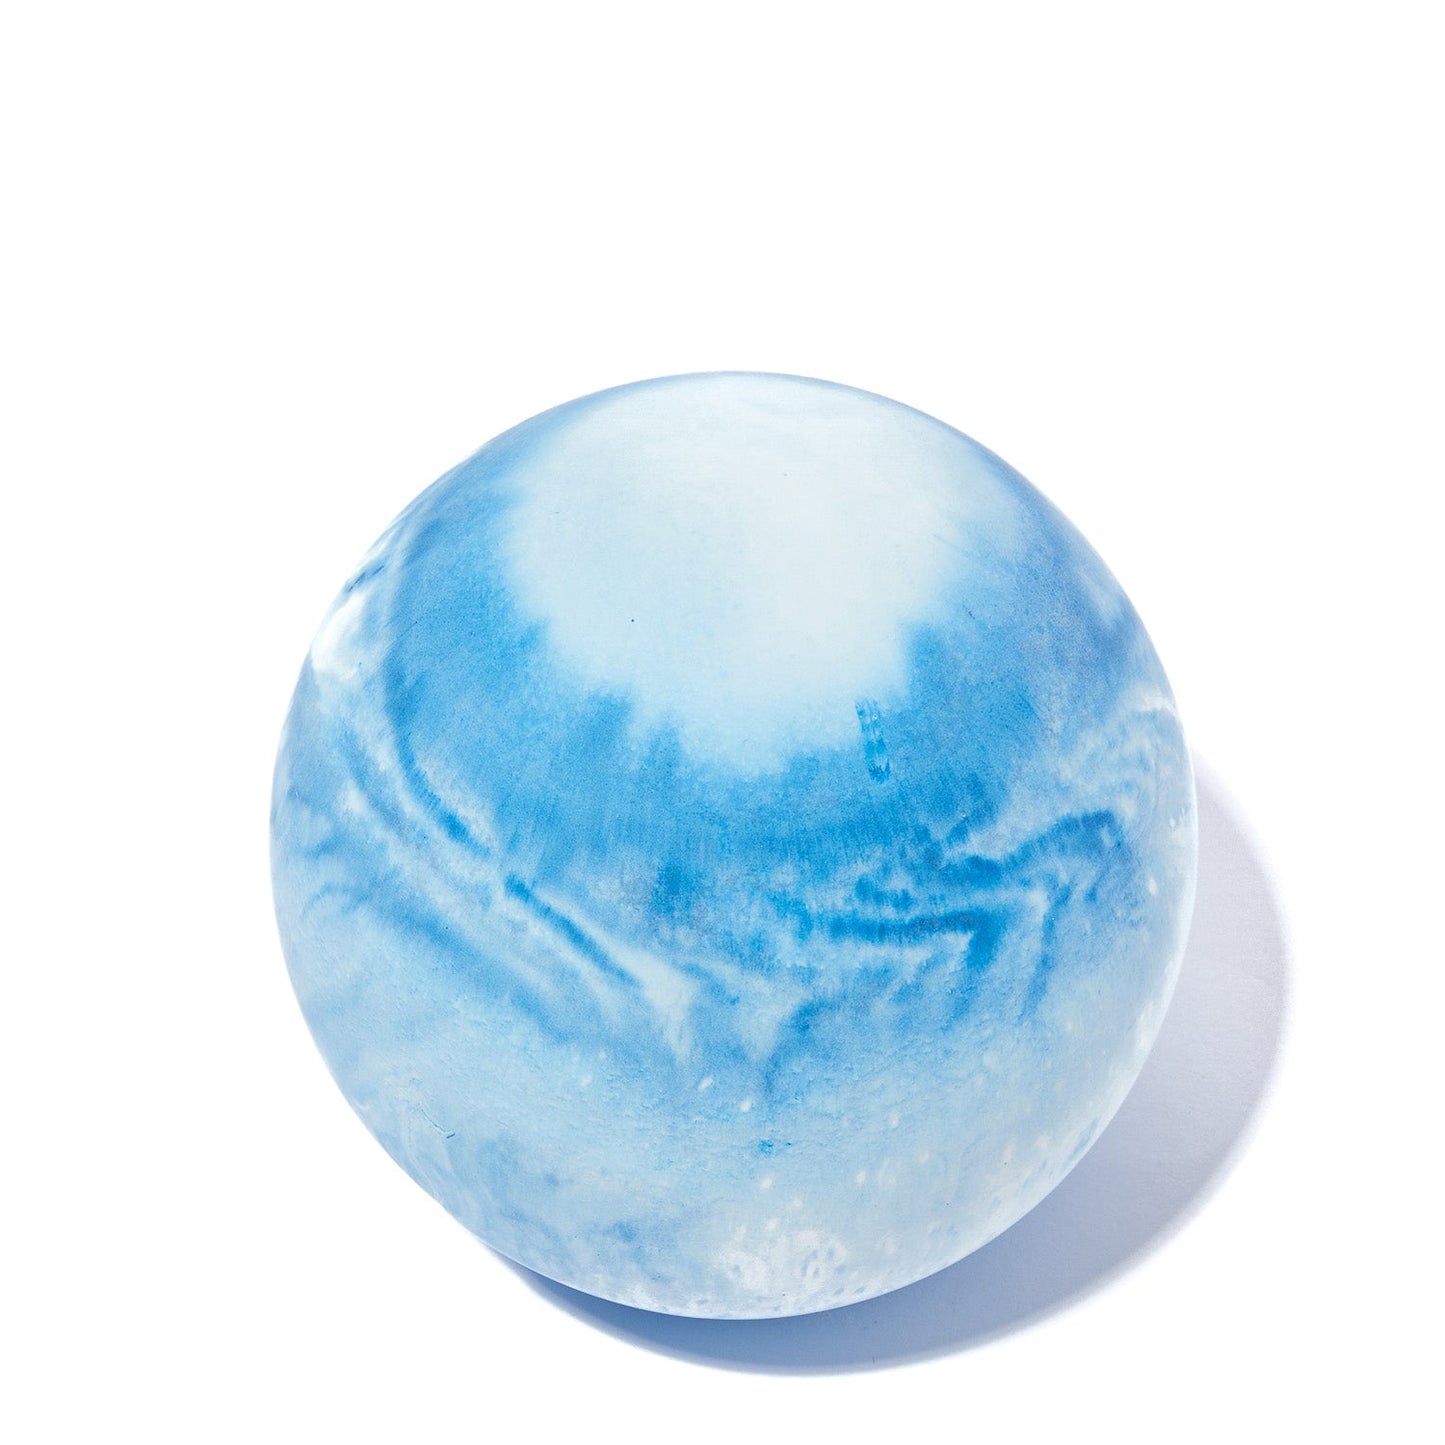 PLANET PAPERWEIGHT | LARGE BLUE